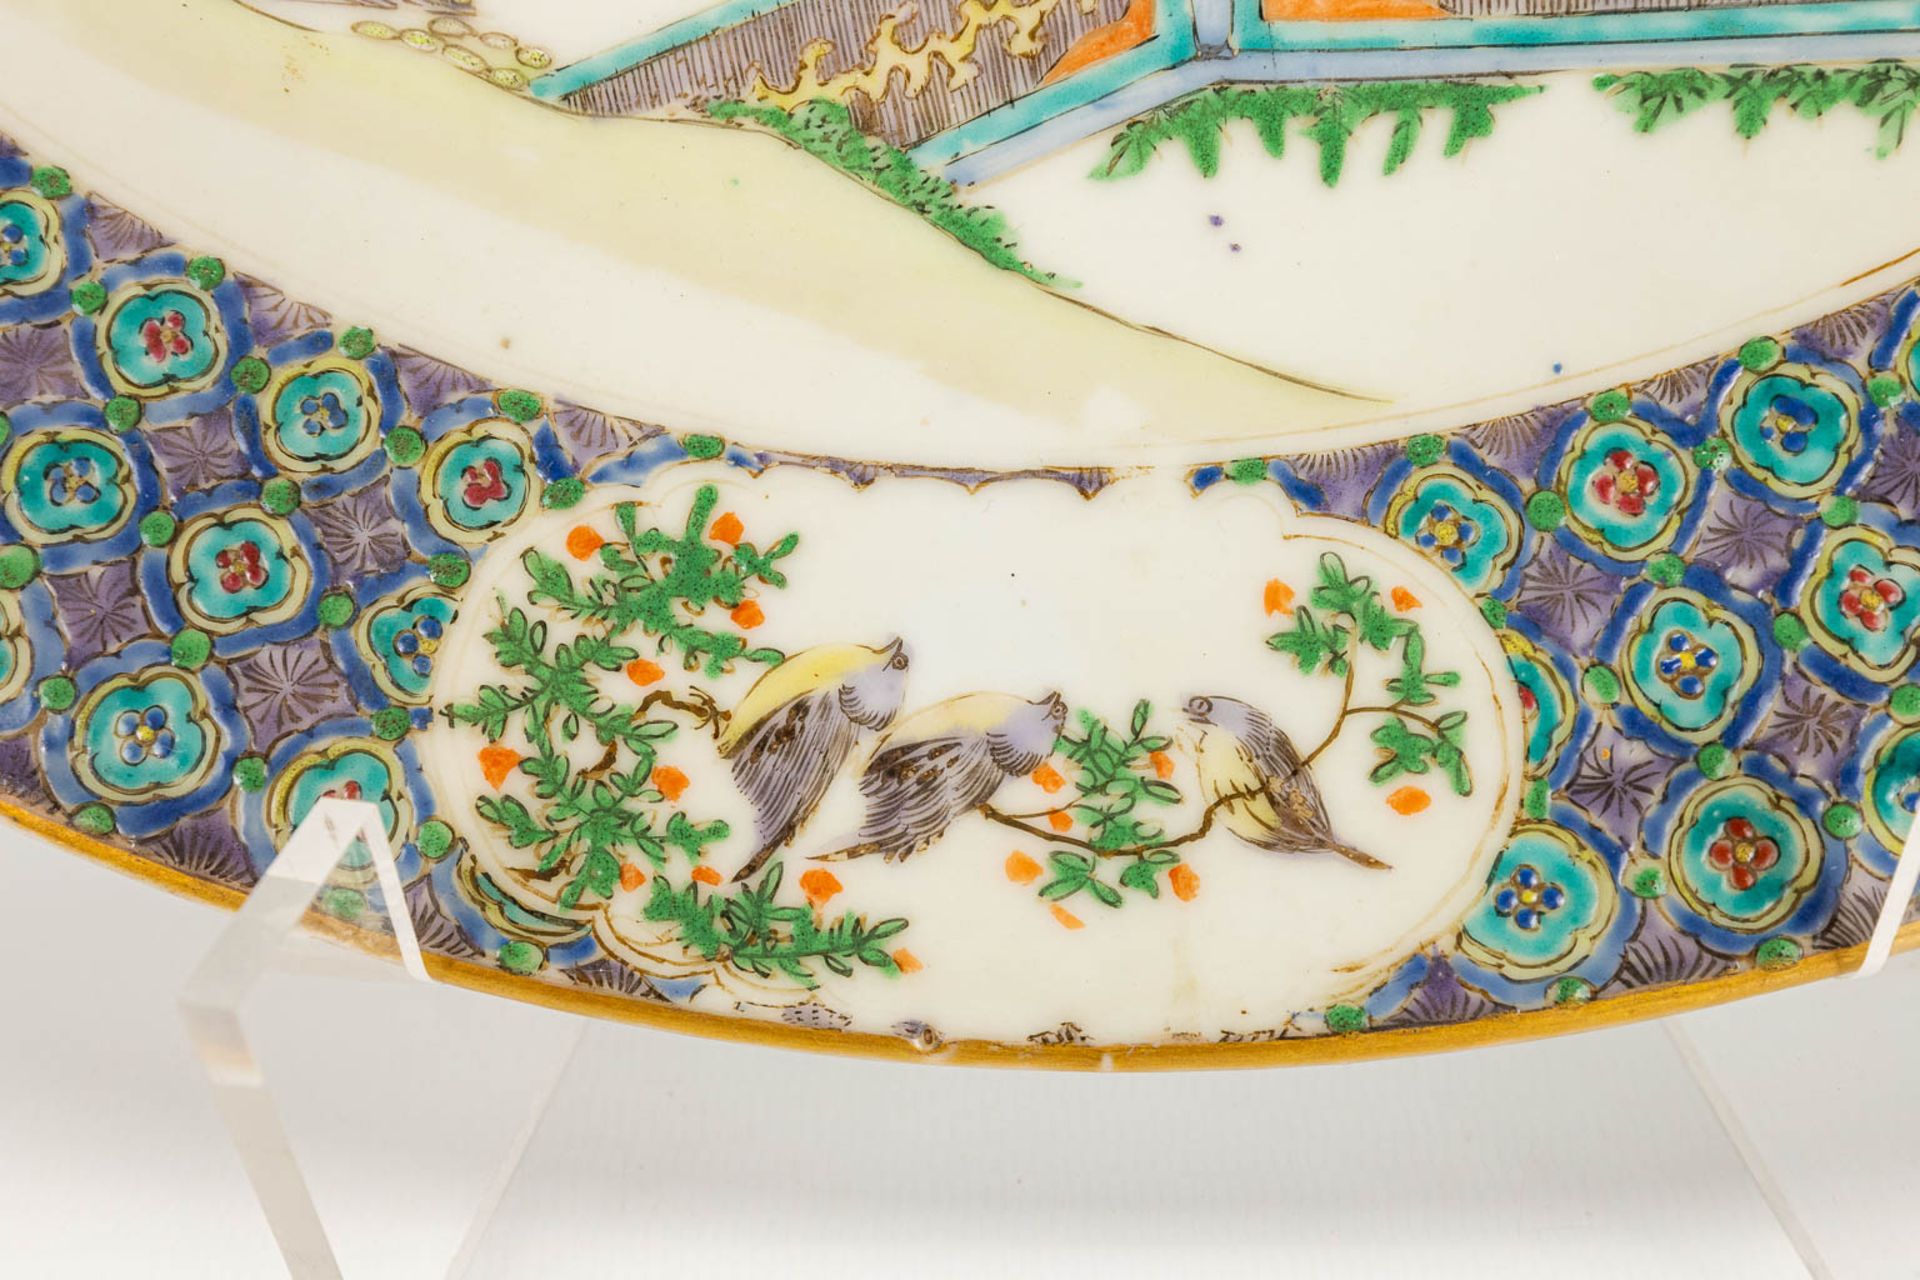 A pair of plates made of Chinese porcelain in Kanton style. 19th century. - Image 11 of 24